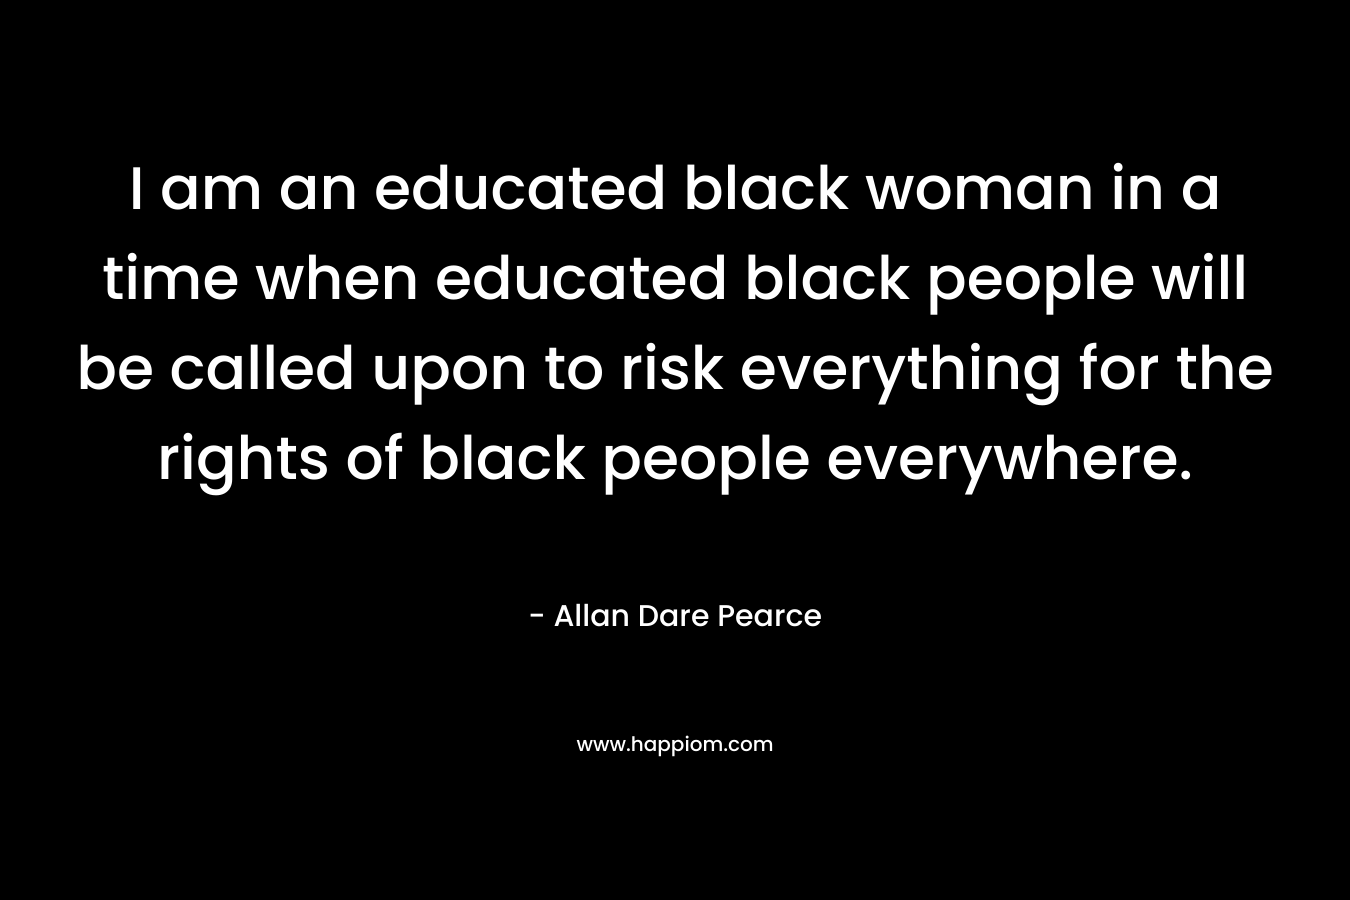 I am an educated black woman in a time when educated black people will be called upon to risk everything for the rights of black people everywhere. – Allan Dare Pearce